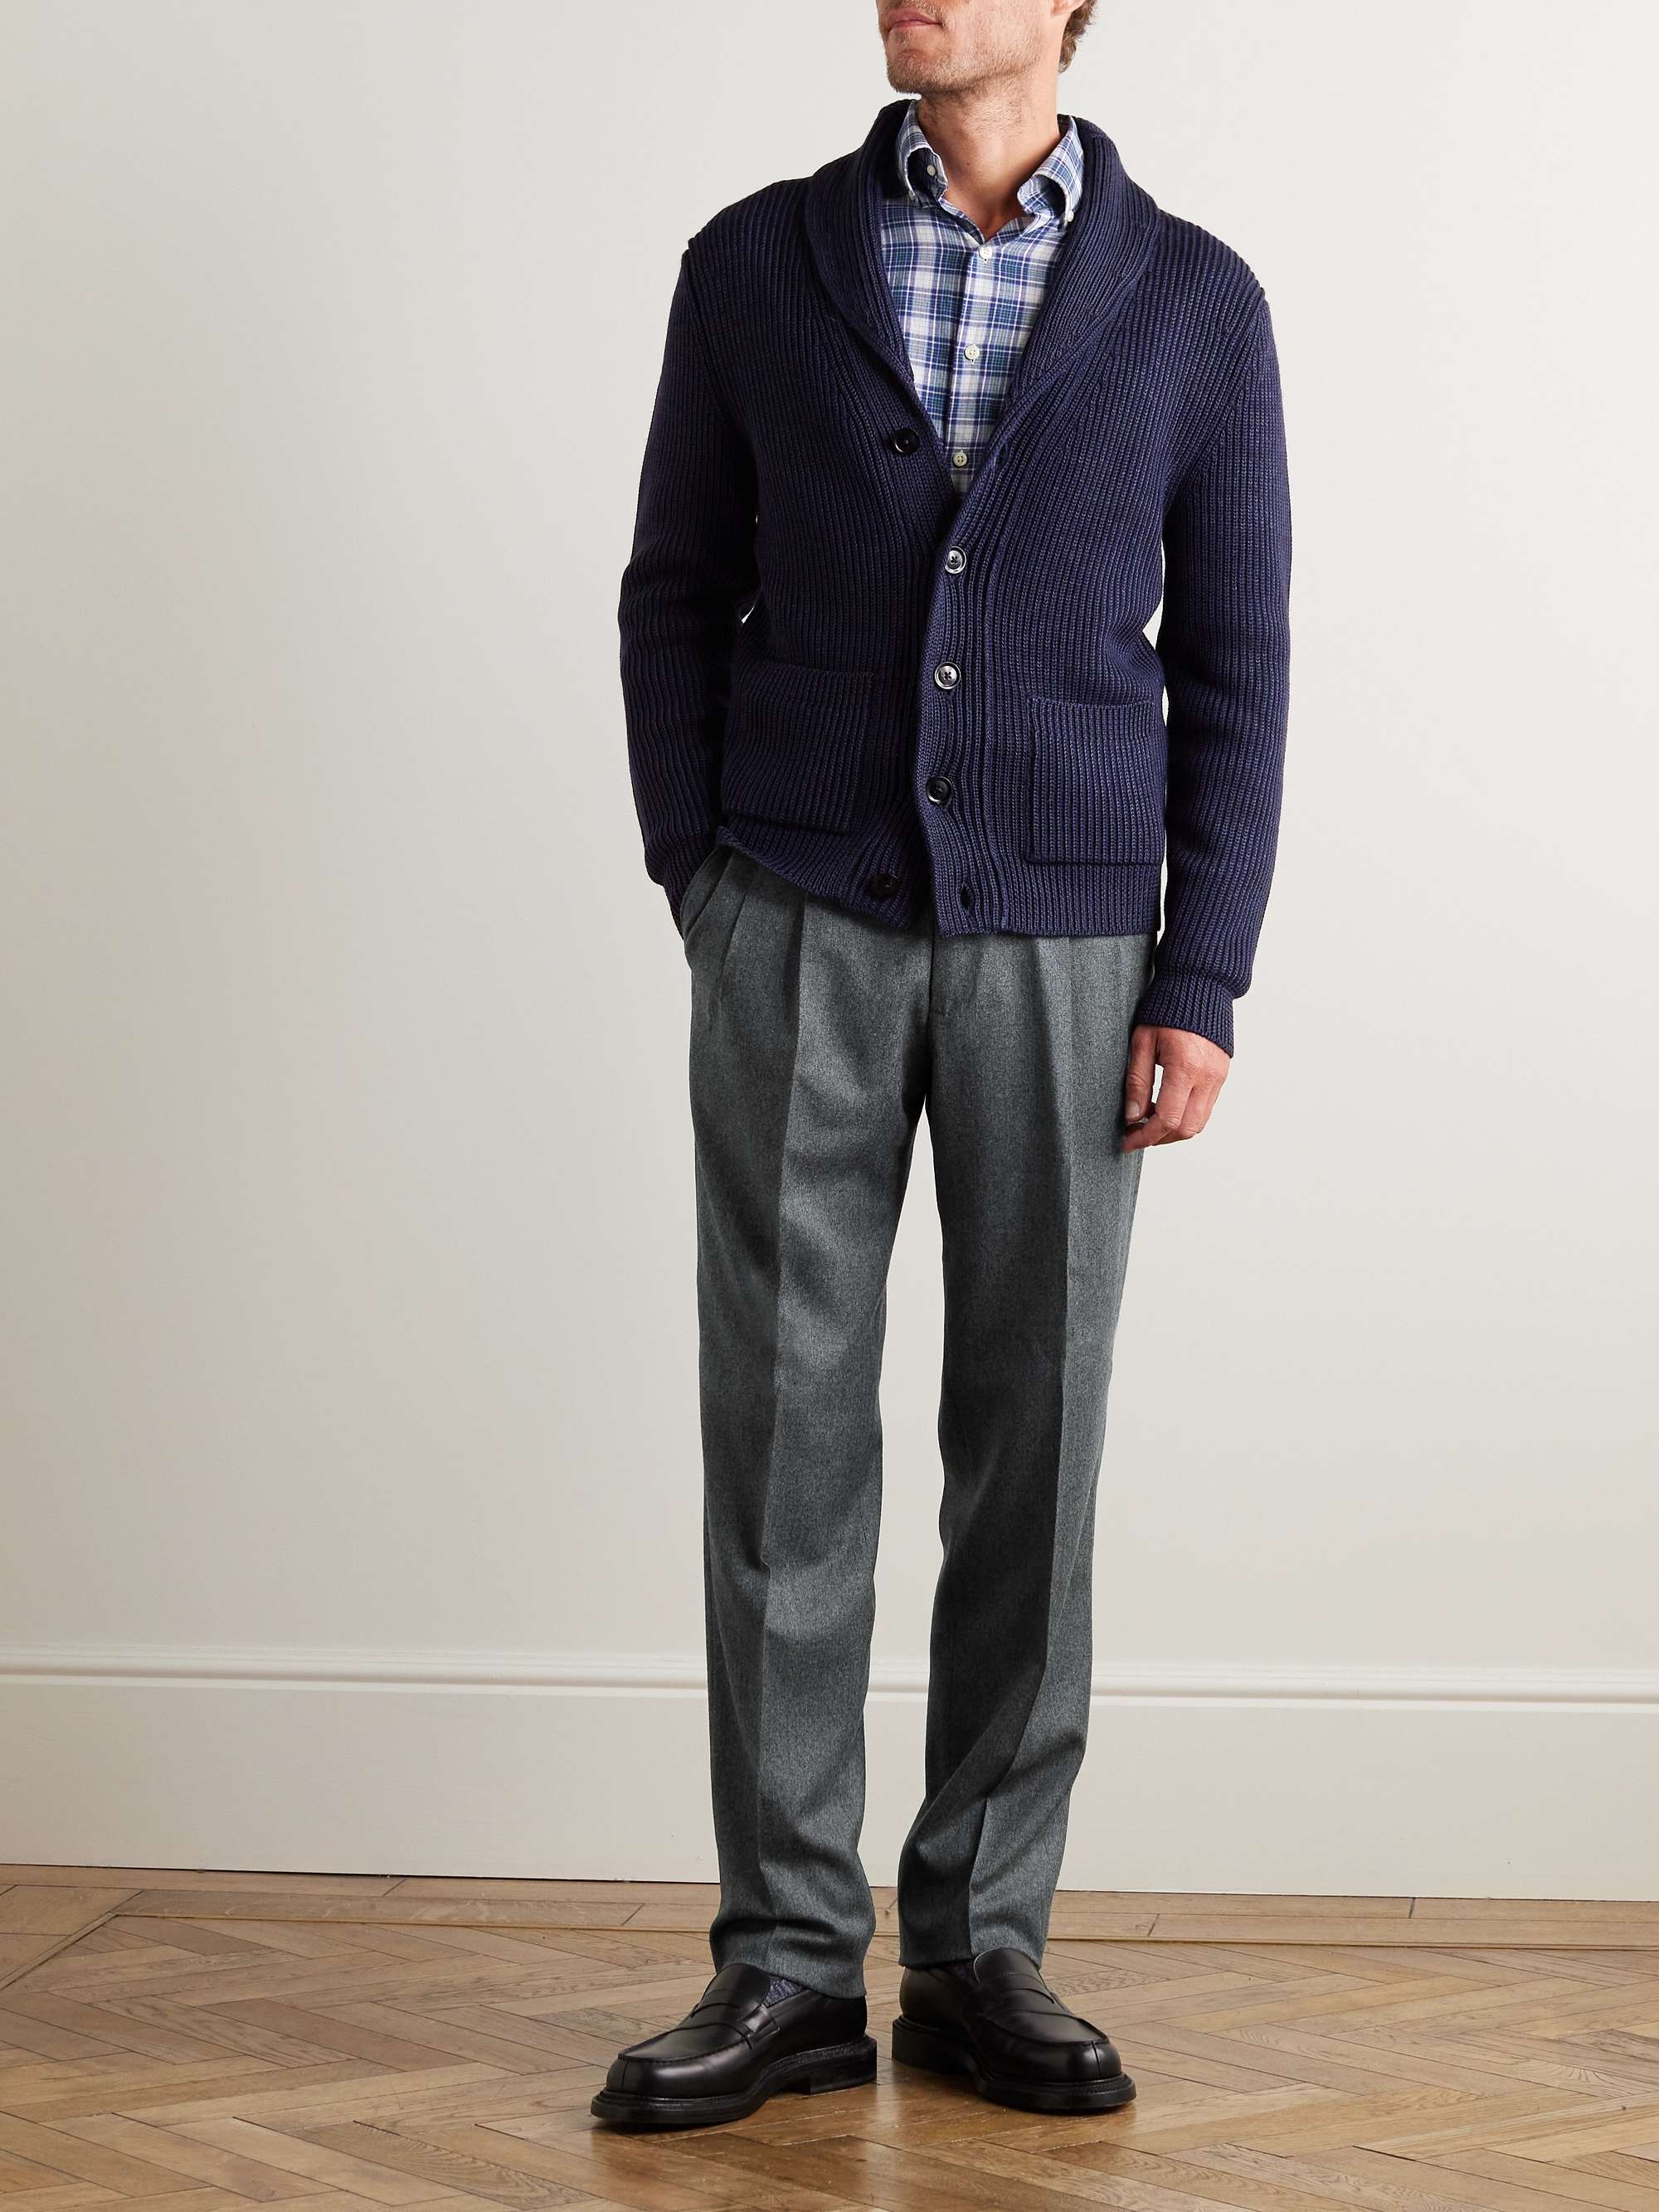 Grey flannel trousers - Blue loafers